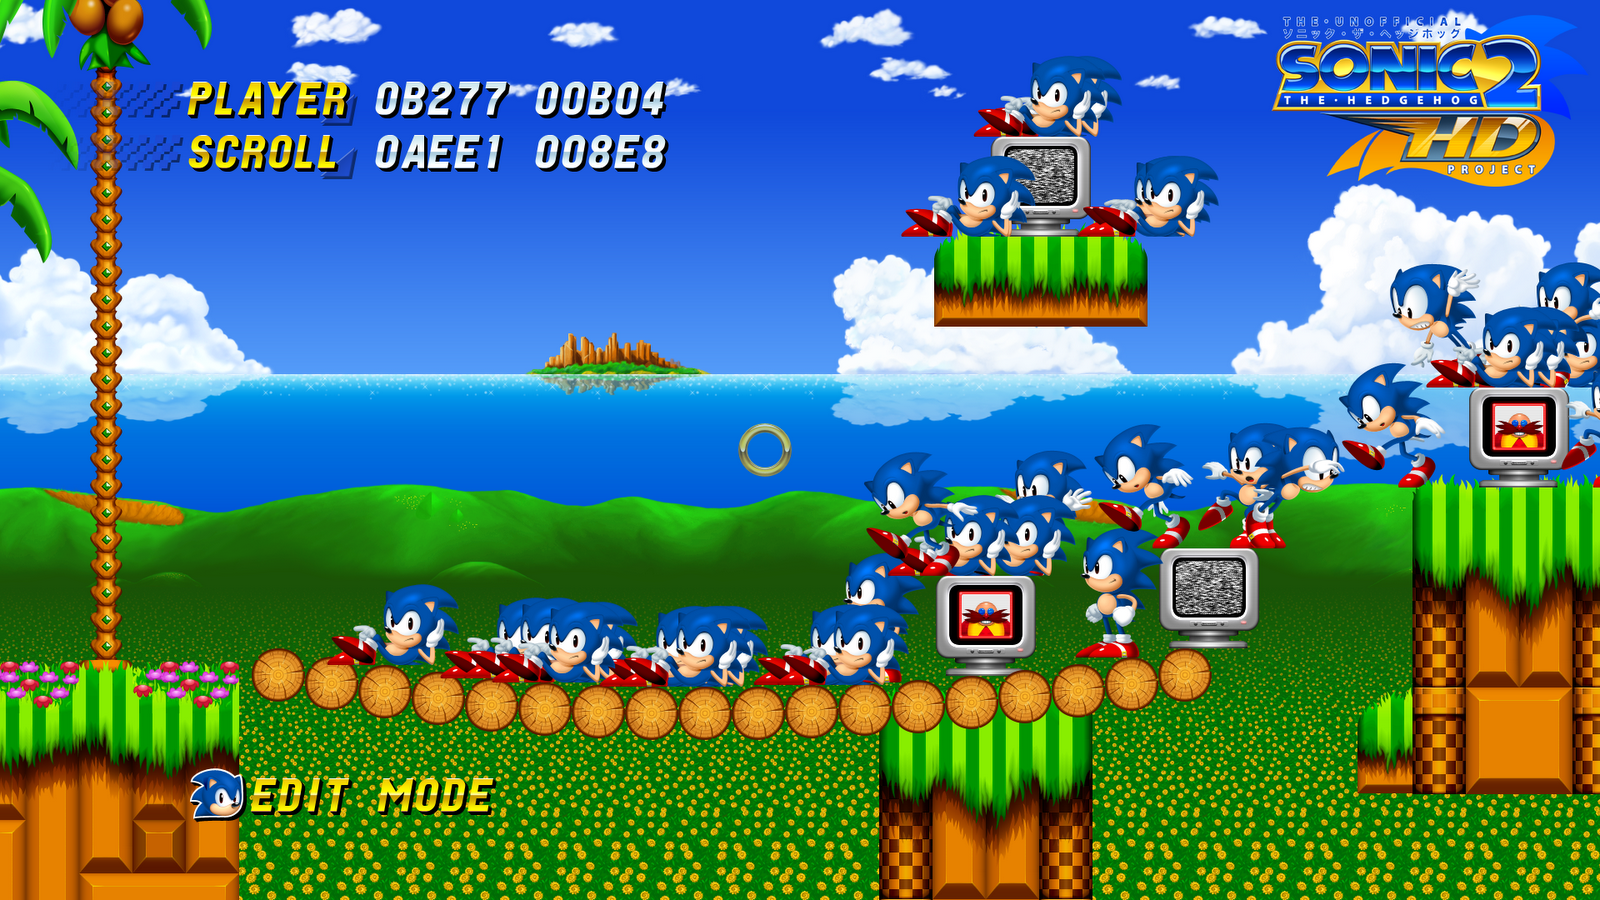 Sonic the hedgehog 2 андроид. Gamejolt Sonic 2. Sonic 2 Android.